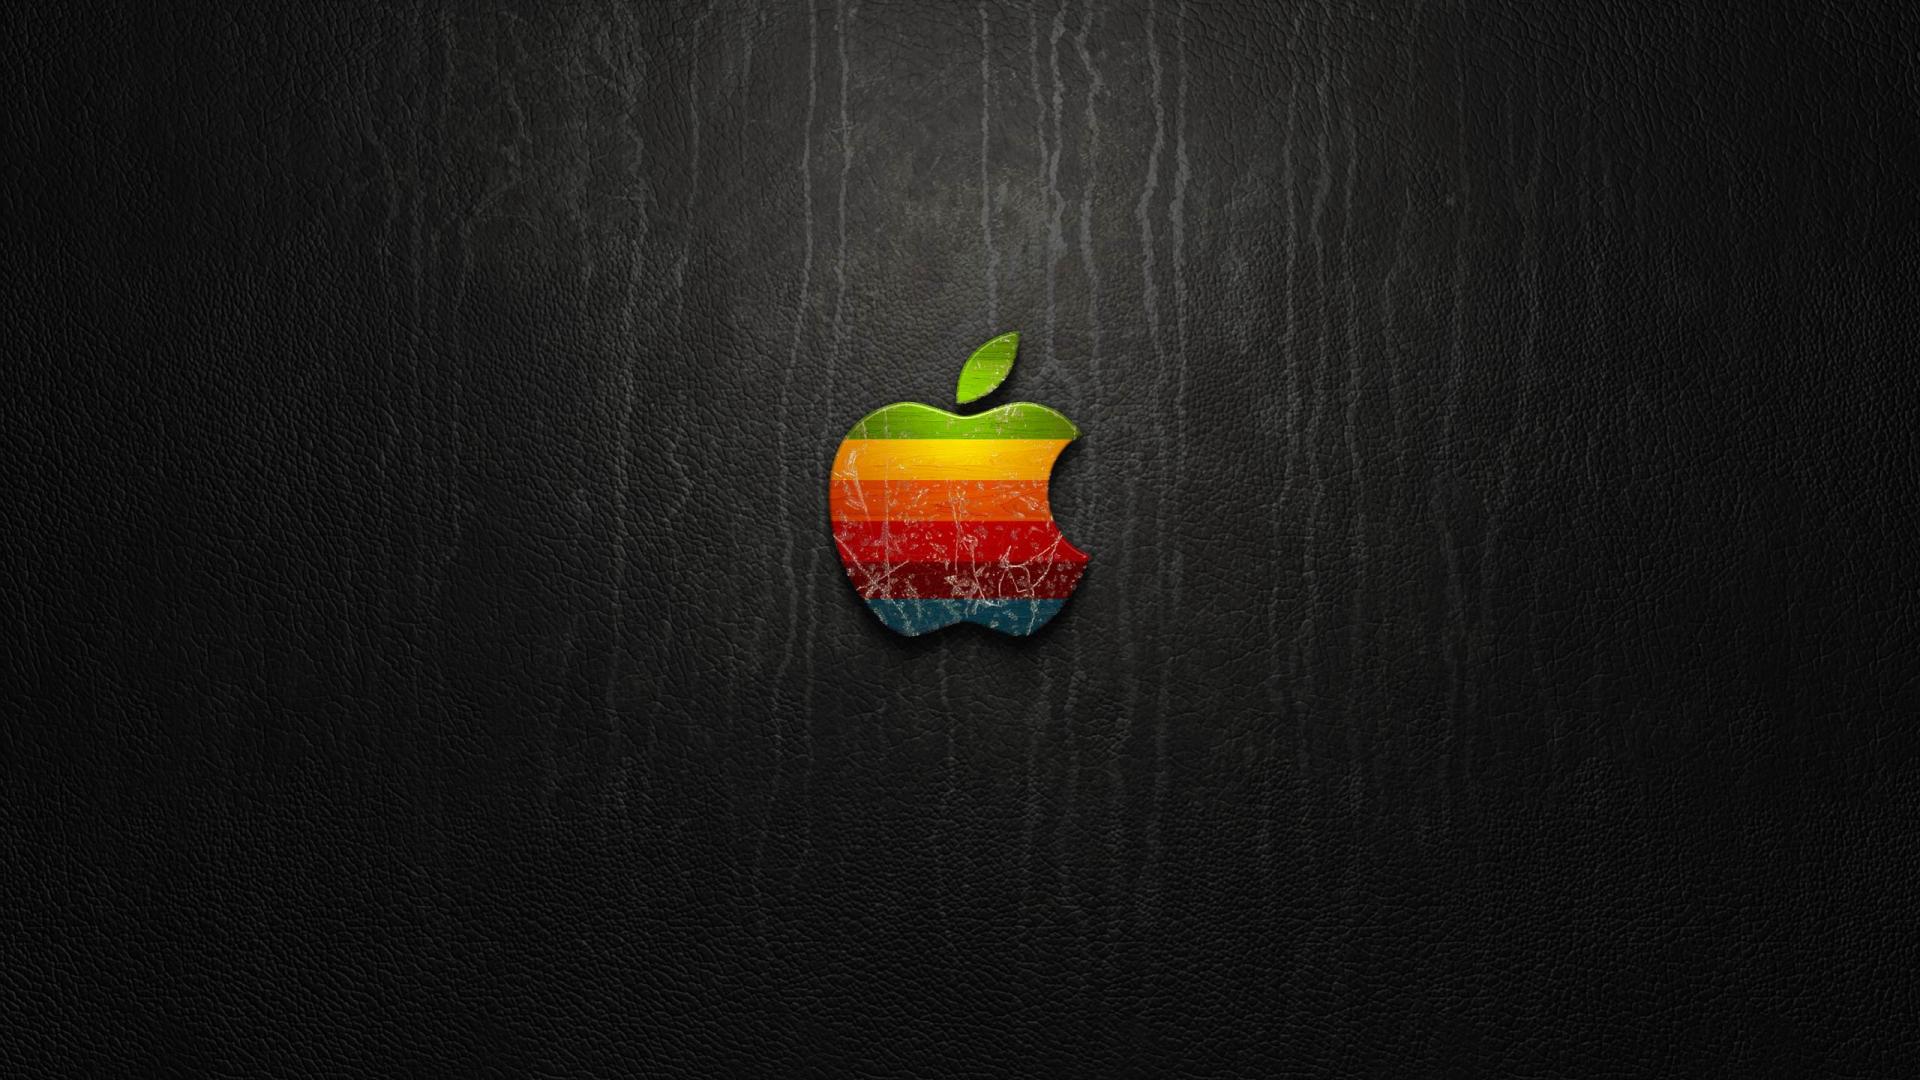 Download Apple For Pc Wallpaper | Full HD Wallpapers